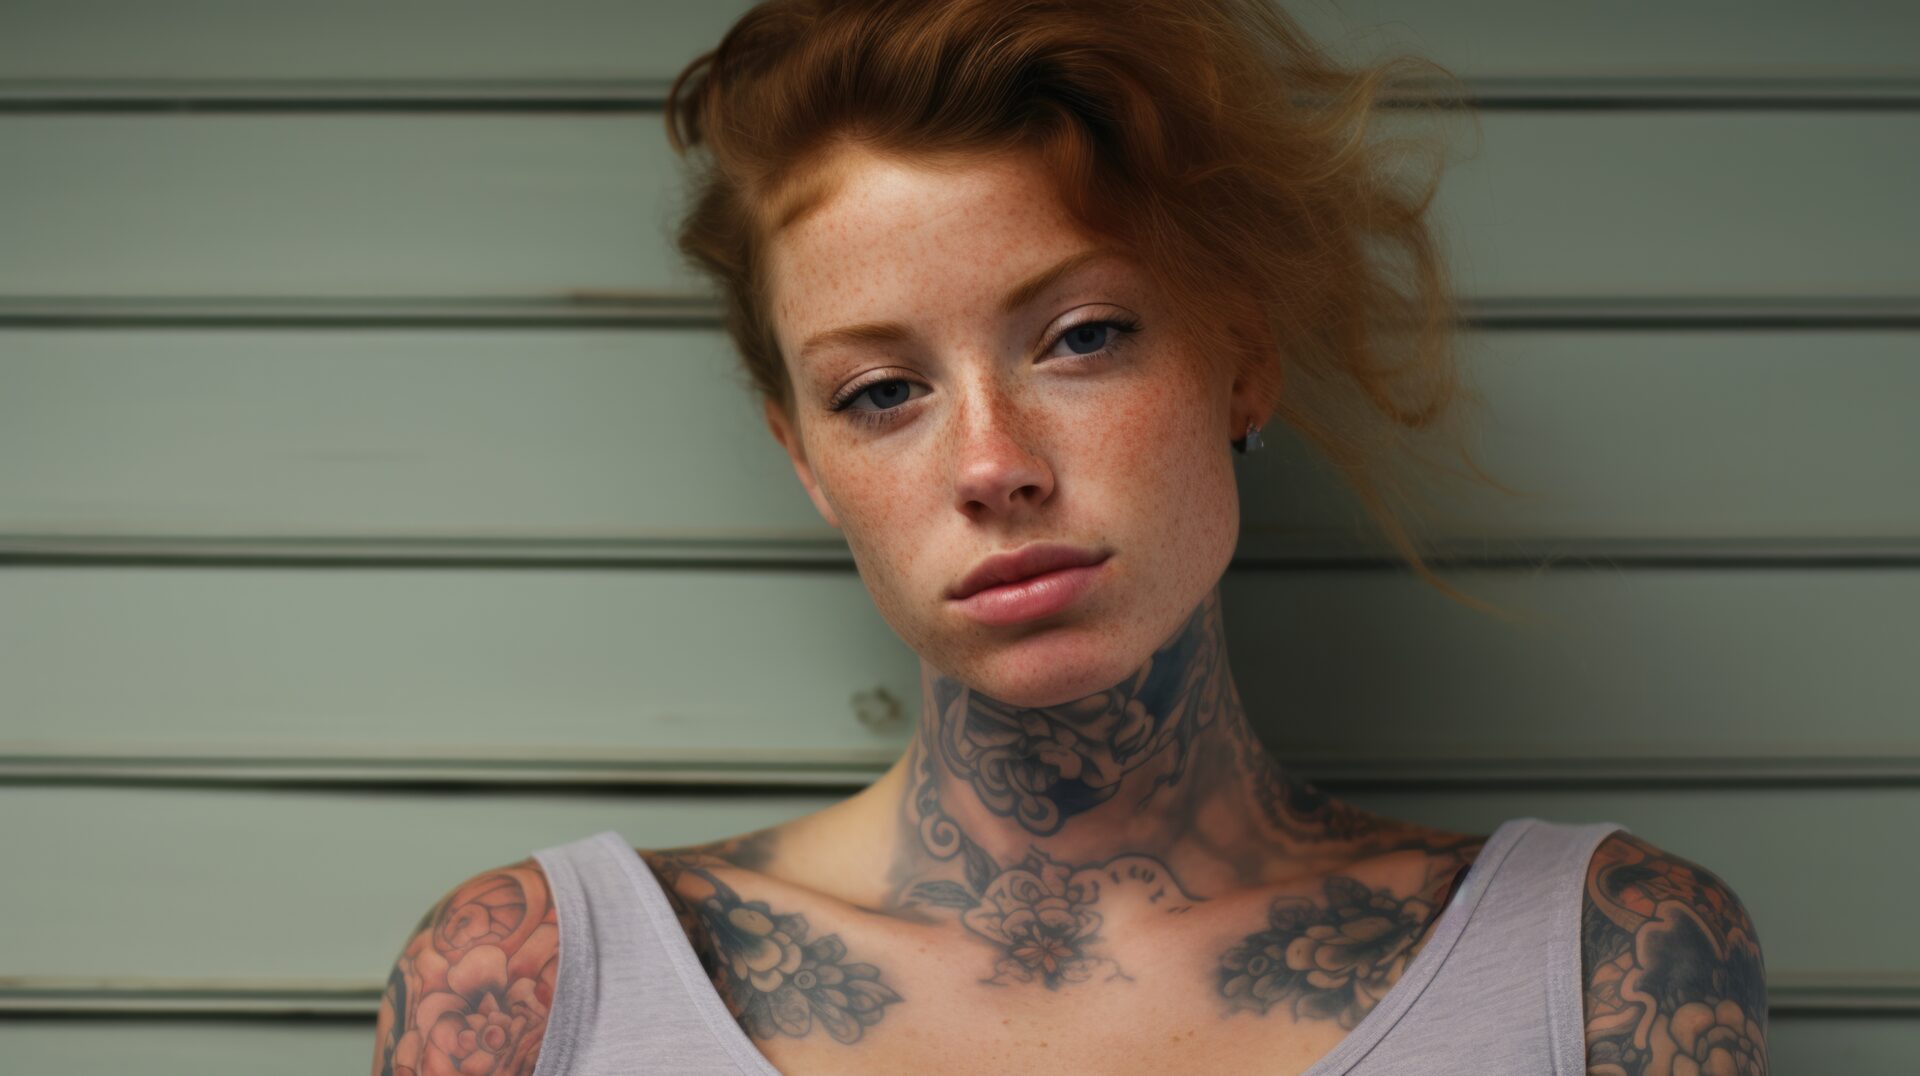 Woman with neck and chest tattoos